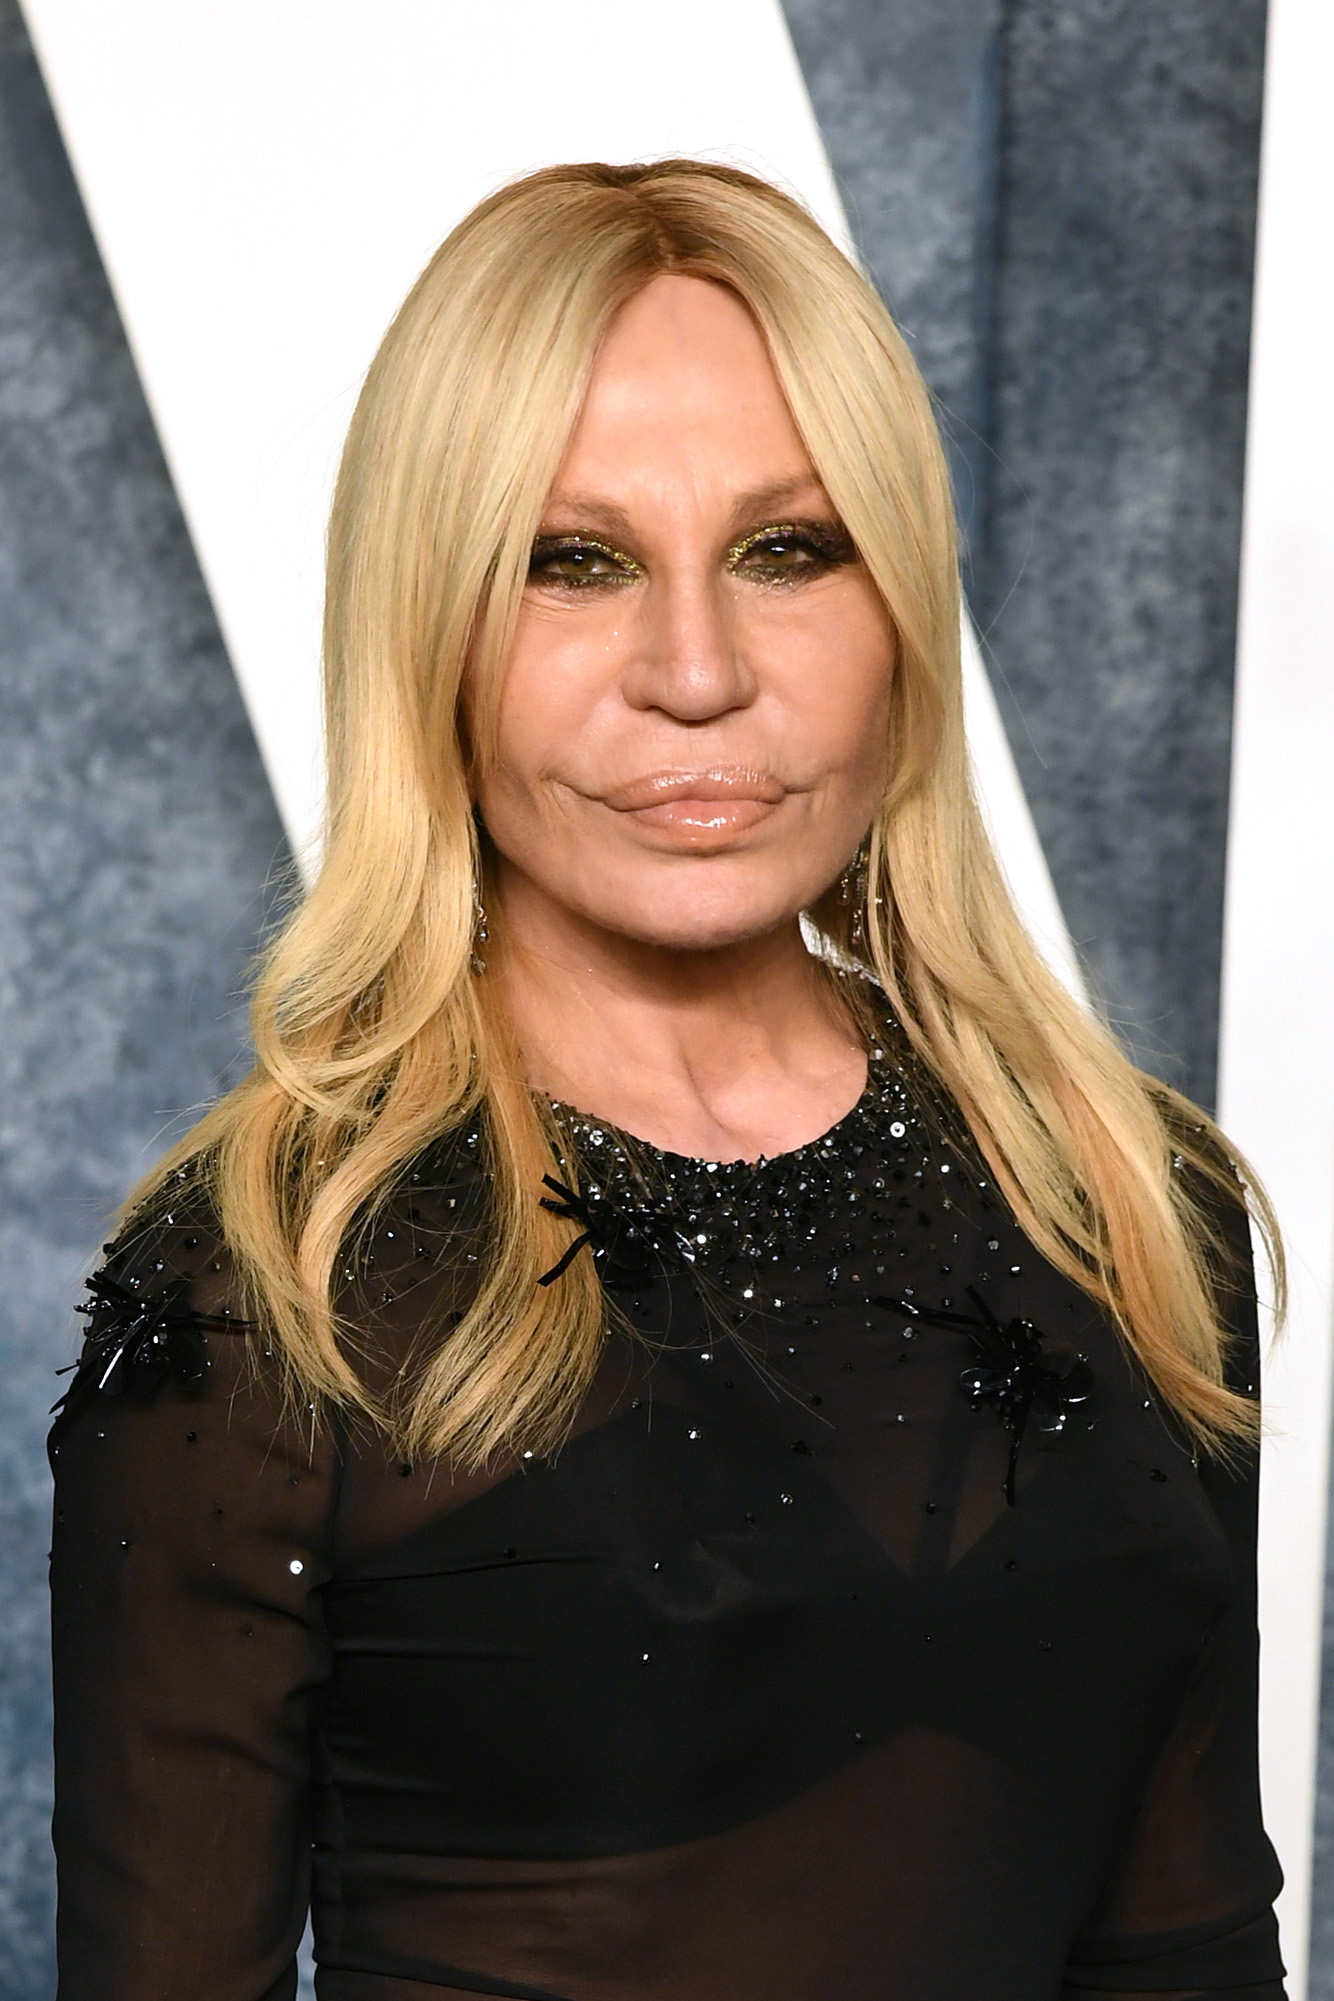 Donatella Versace attends the 2023 Vanity Fair Oscar Party on March 12, 2023 in Beverly Hills, California | Source: Getty Images